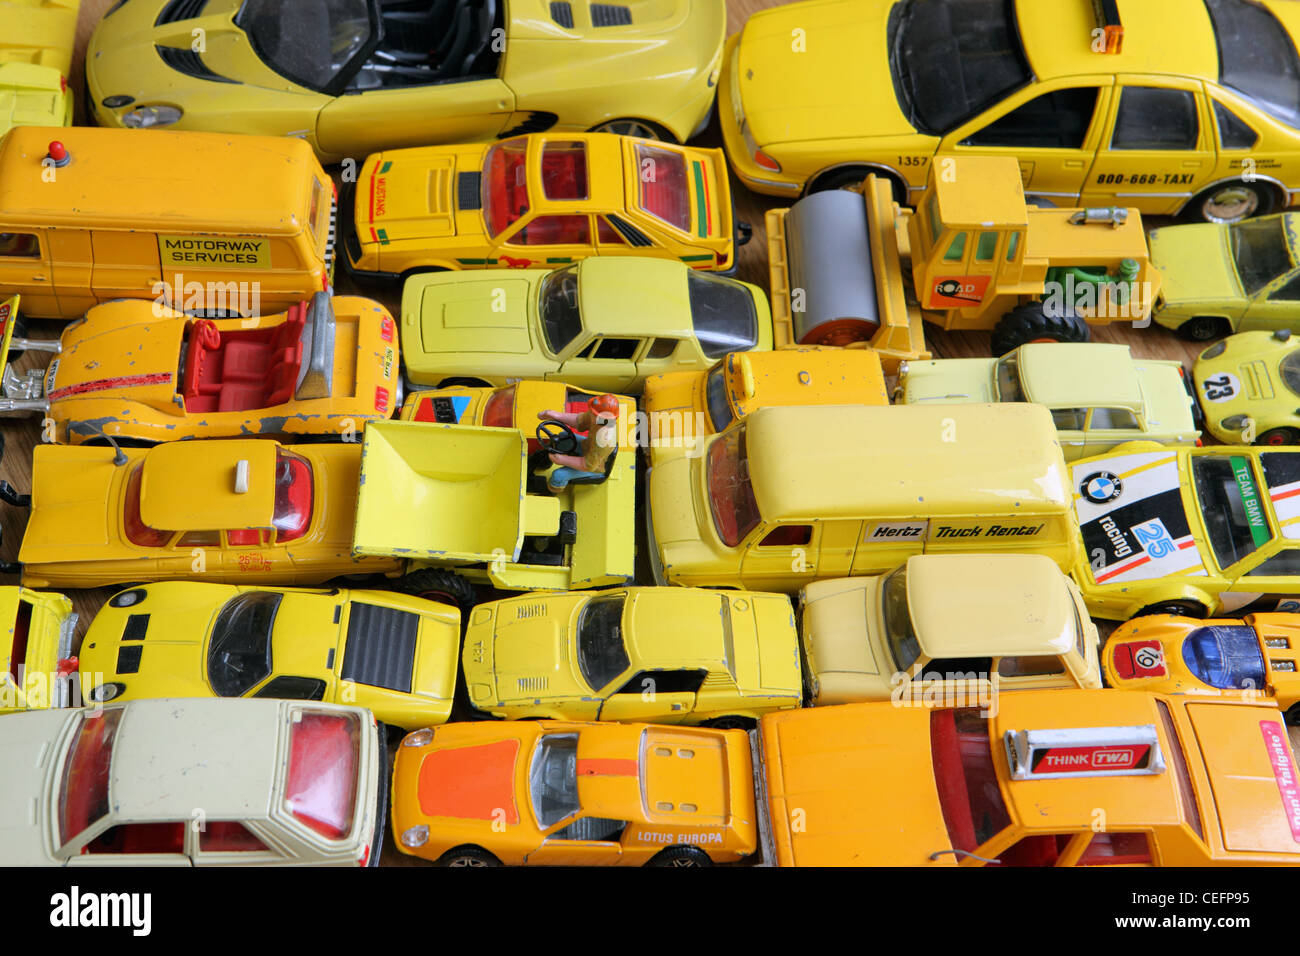 traffic jam of yellow model cars, all different shades of yellow, home studio, UK Stock Photo